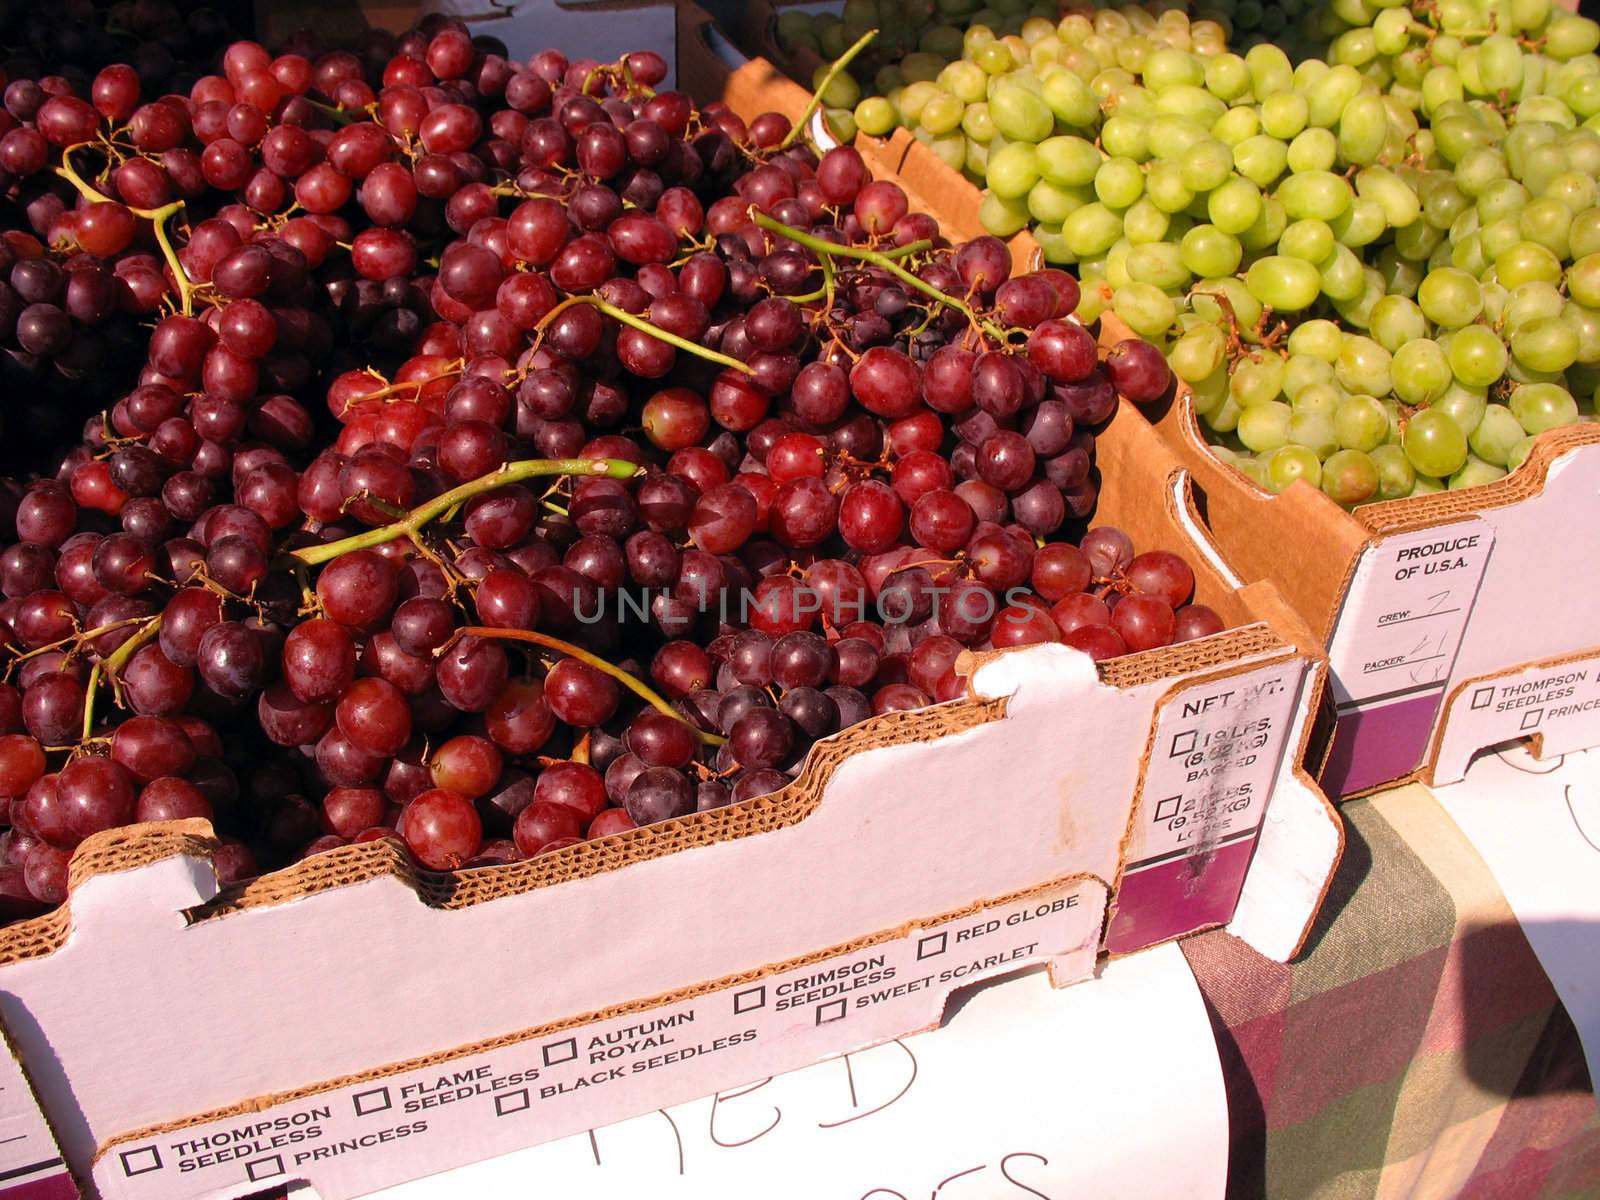 Some red and green grapes for sale at the farmers market.